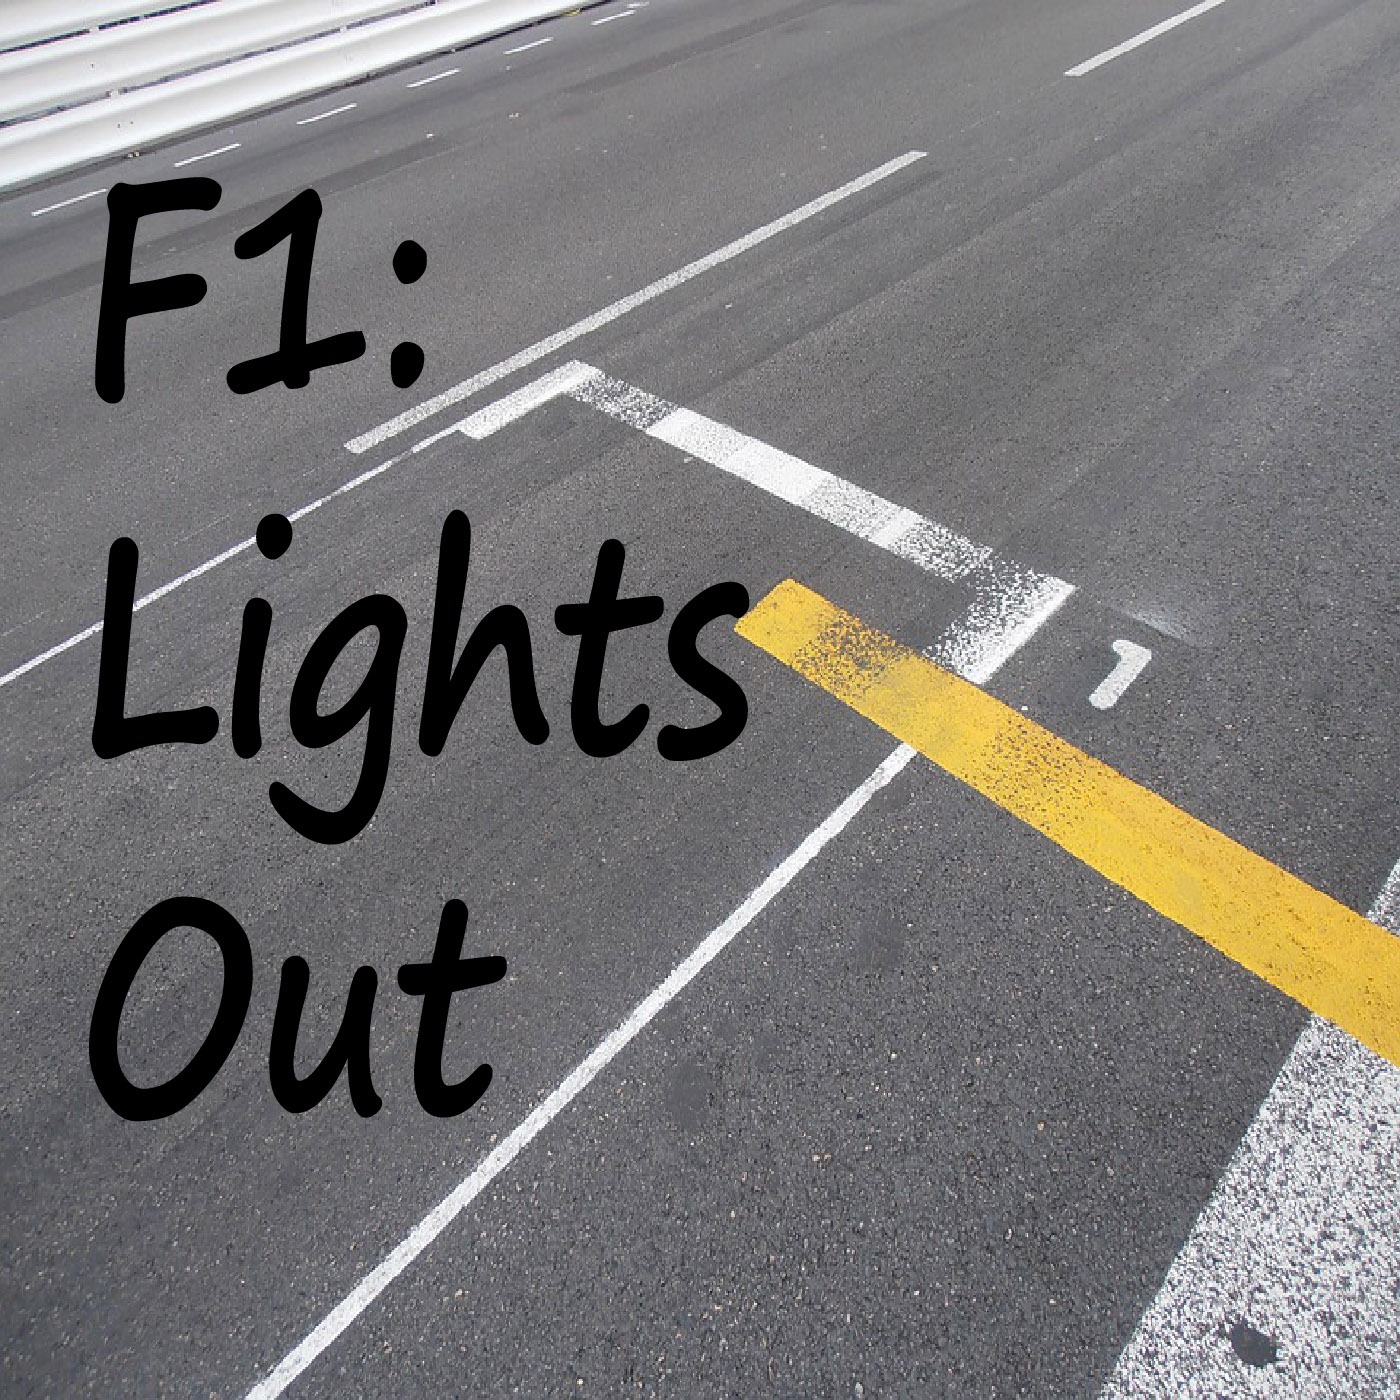 F1: Lights Out